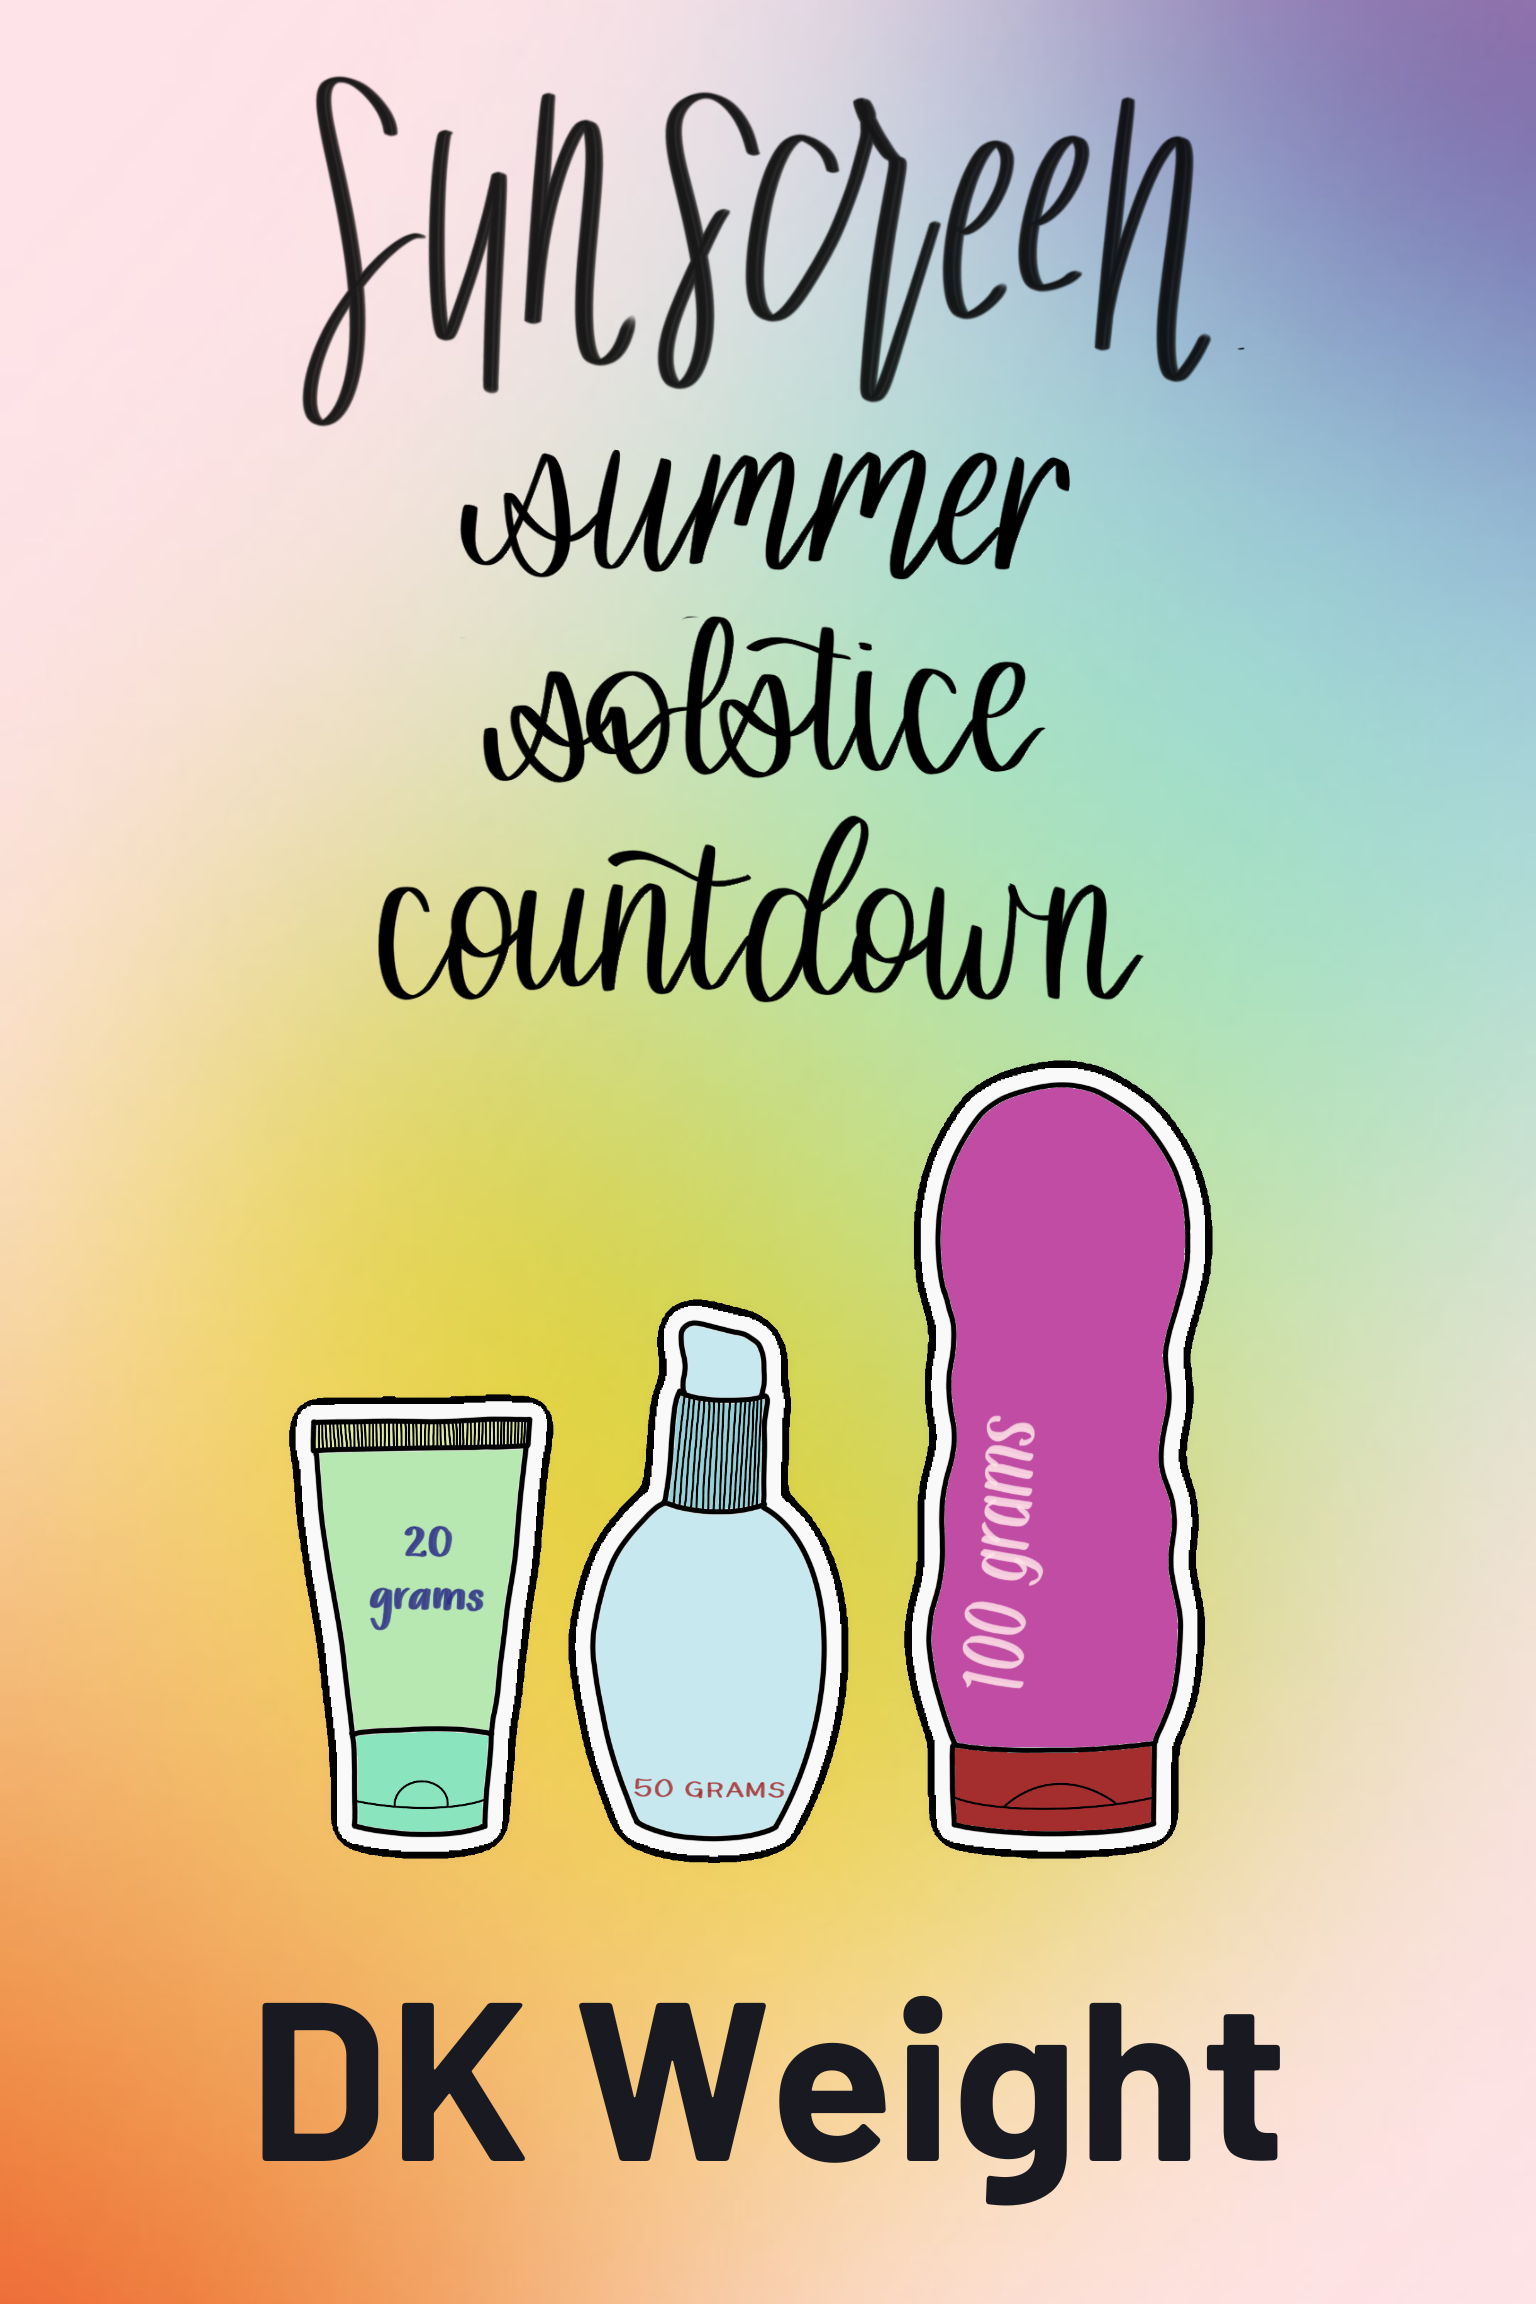 A rainbow gradient with three illustrations of sunscreen bottles and the words "Sunscreen Summer Solstice Countdown" and "DK Weight."